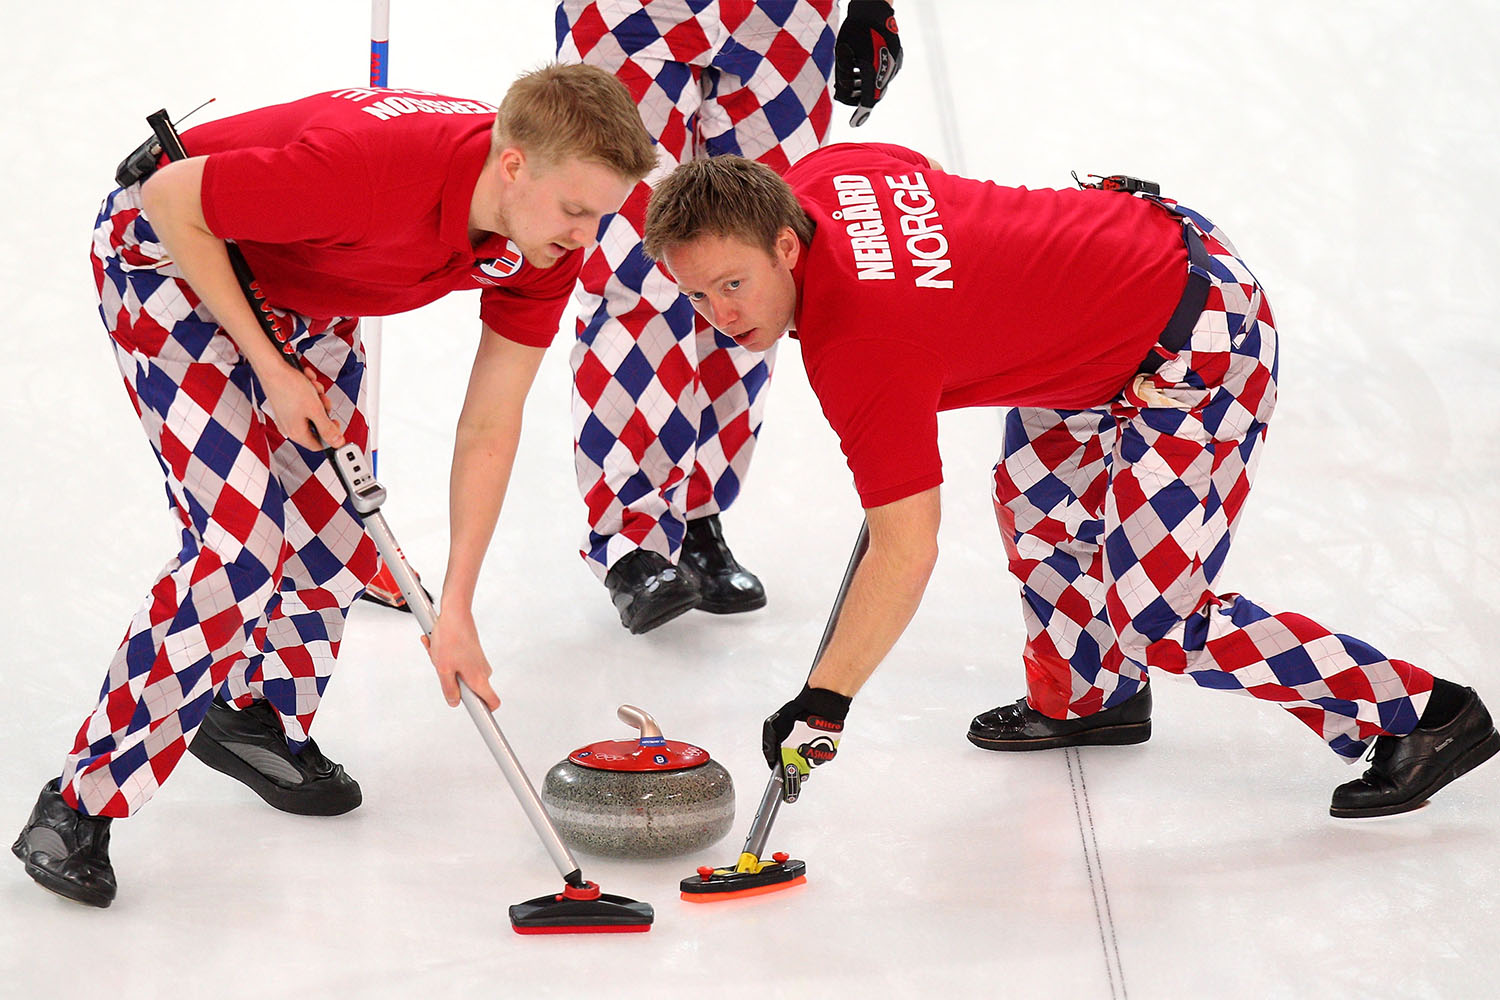 The olympic curling outfits for the 2010 olympics